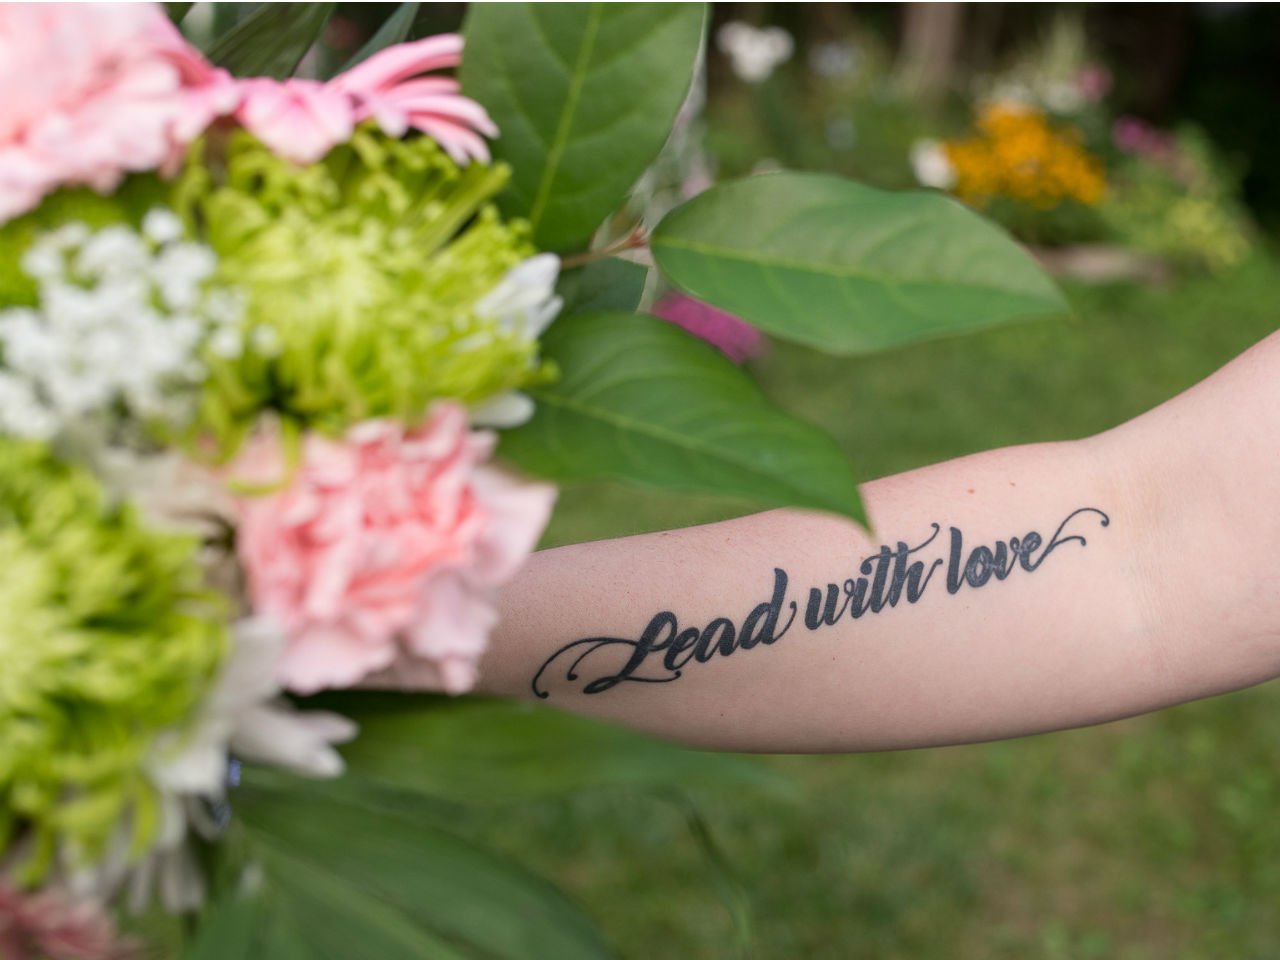 trans daughter-Forearm tattoo sating "Lead with Love."